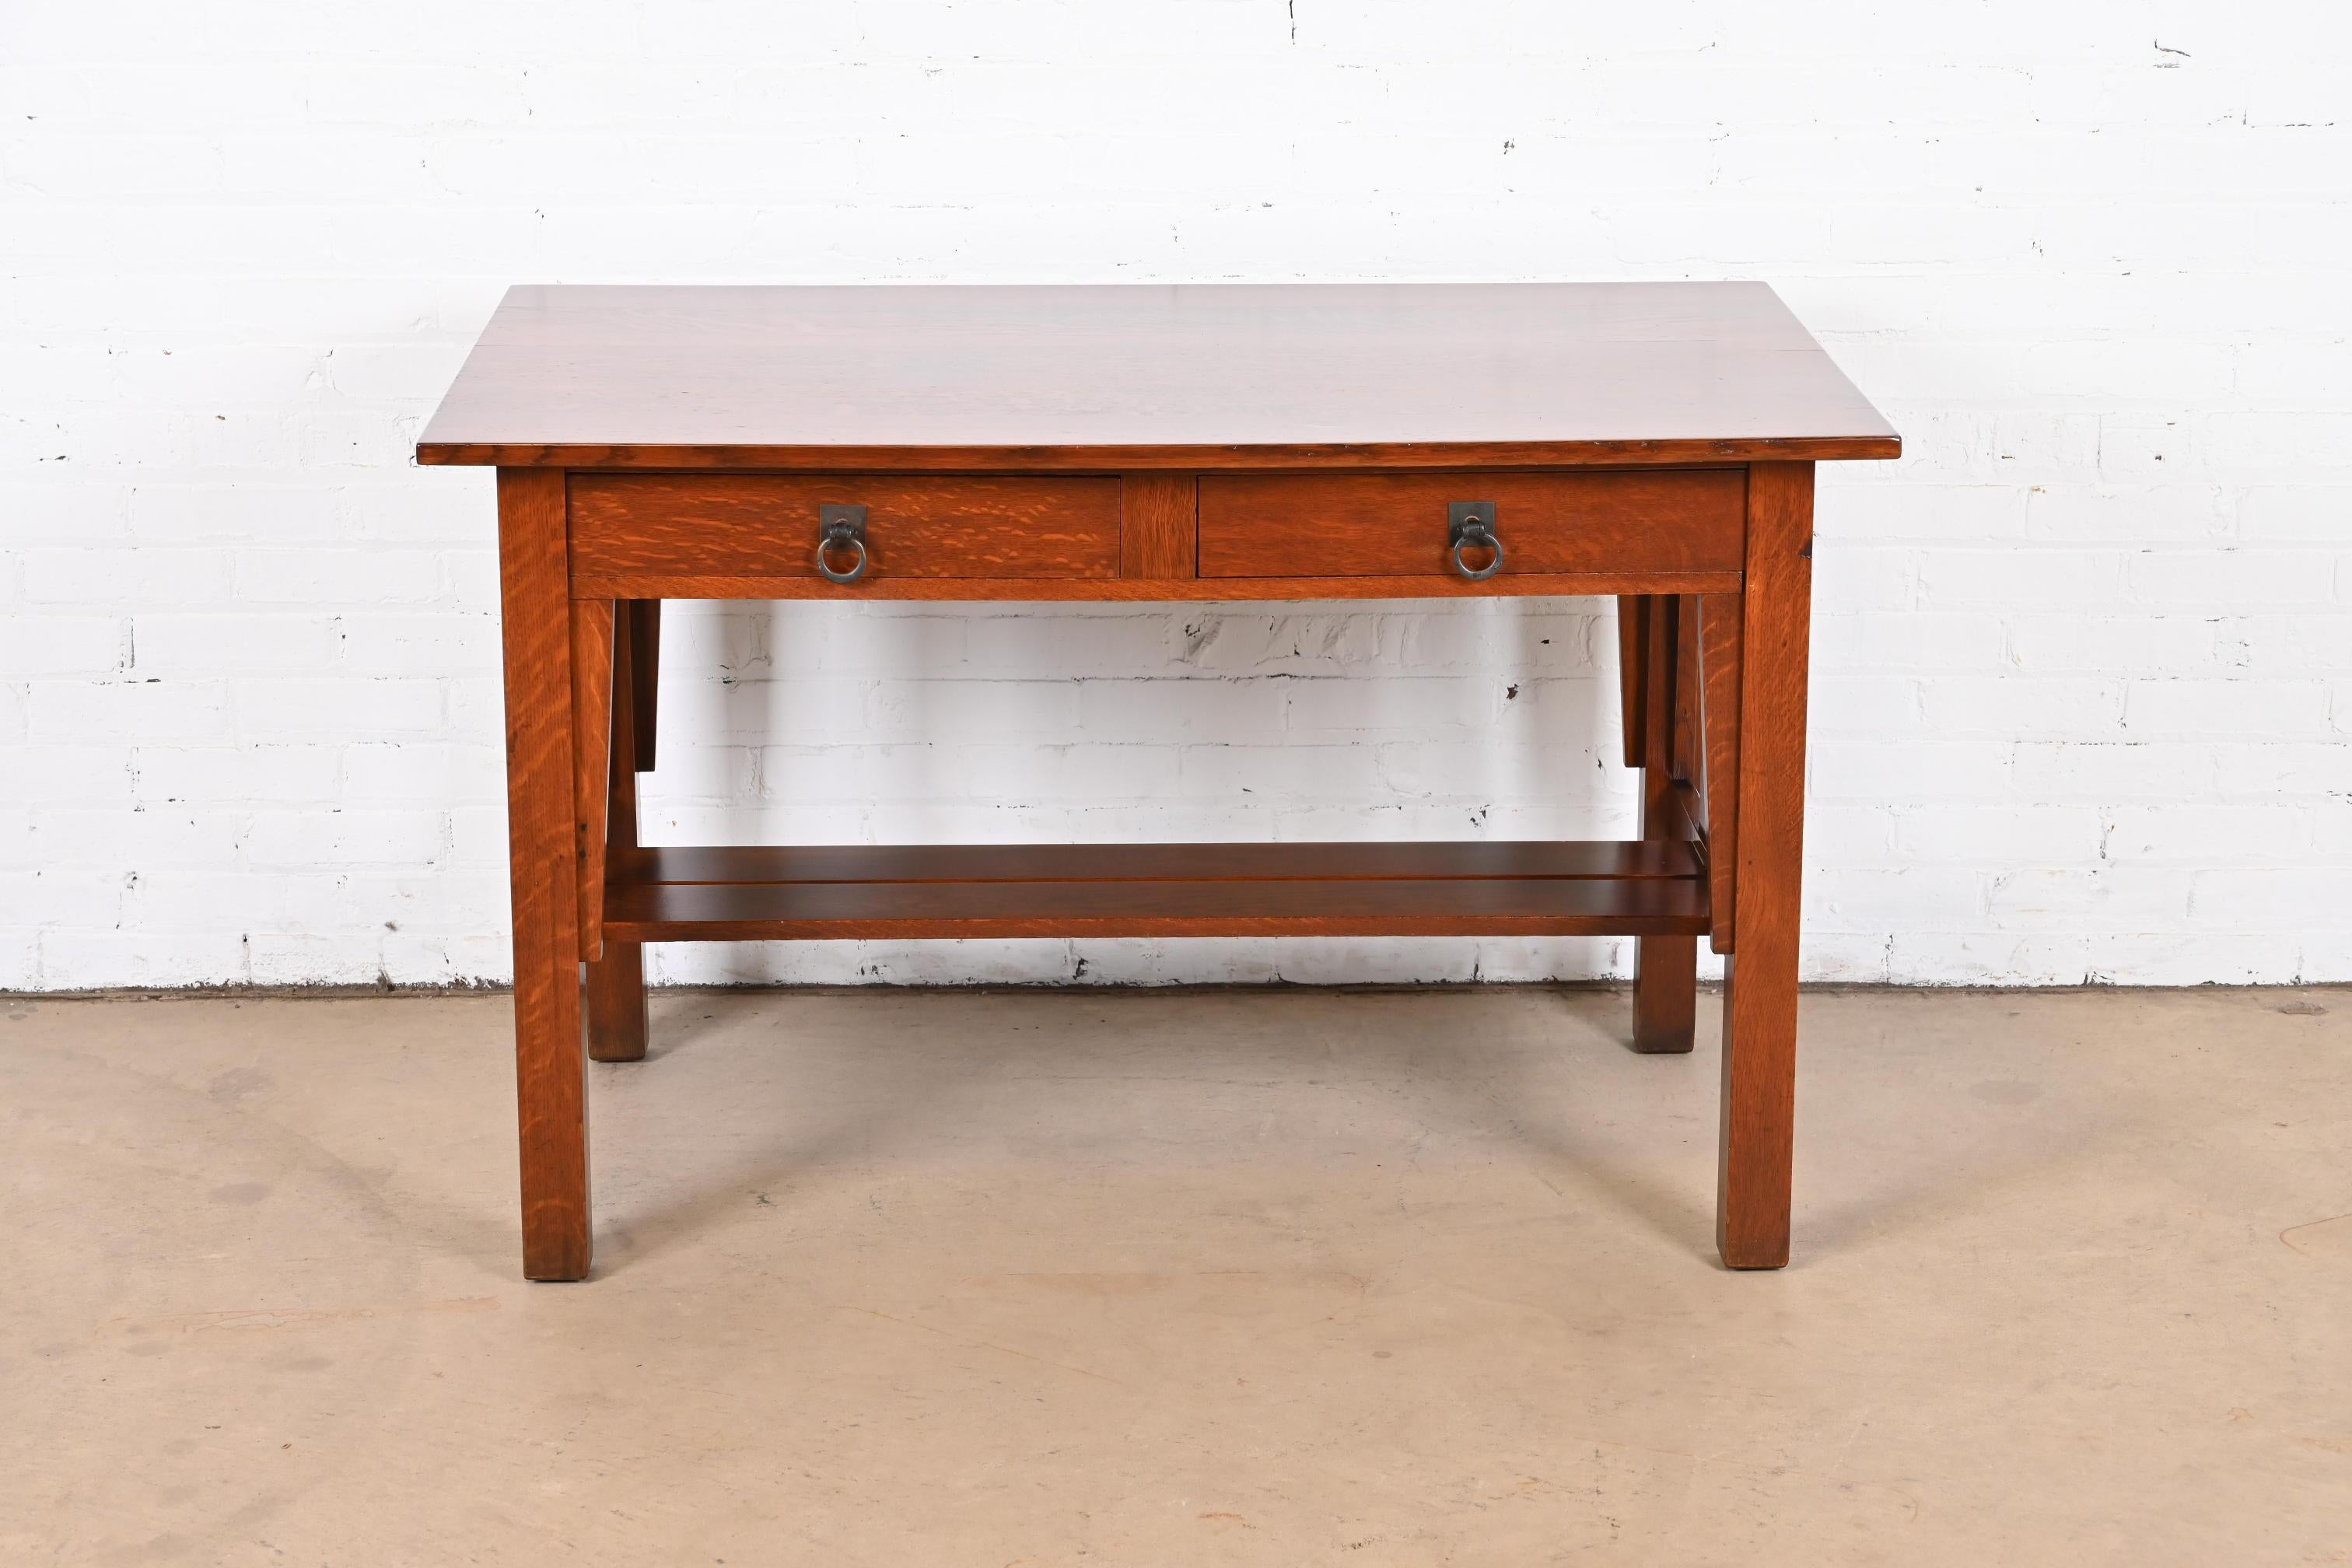 An exceptional antique Mission or Arts & Crafts writing desk or library table

By Stickley Brothers

USA, Circa 1900

Quarter sawn oak, with original hammered copper hardware.

Measures: 48